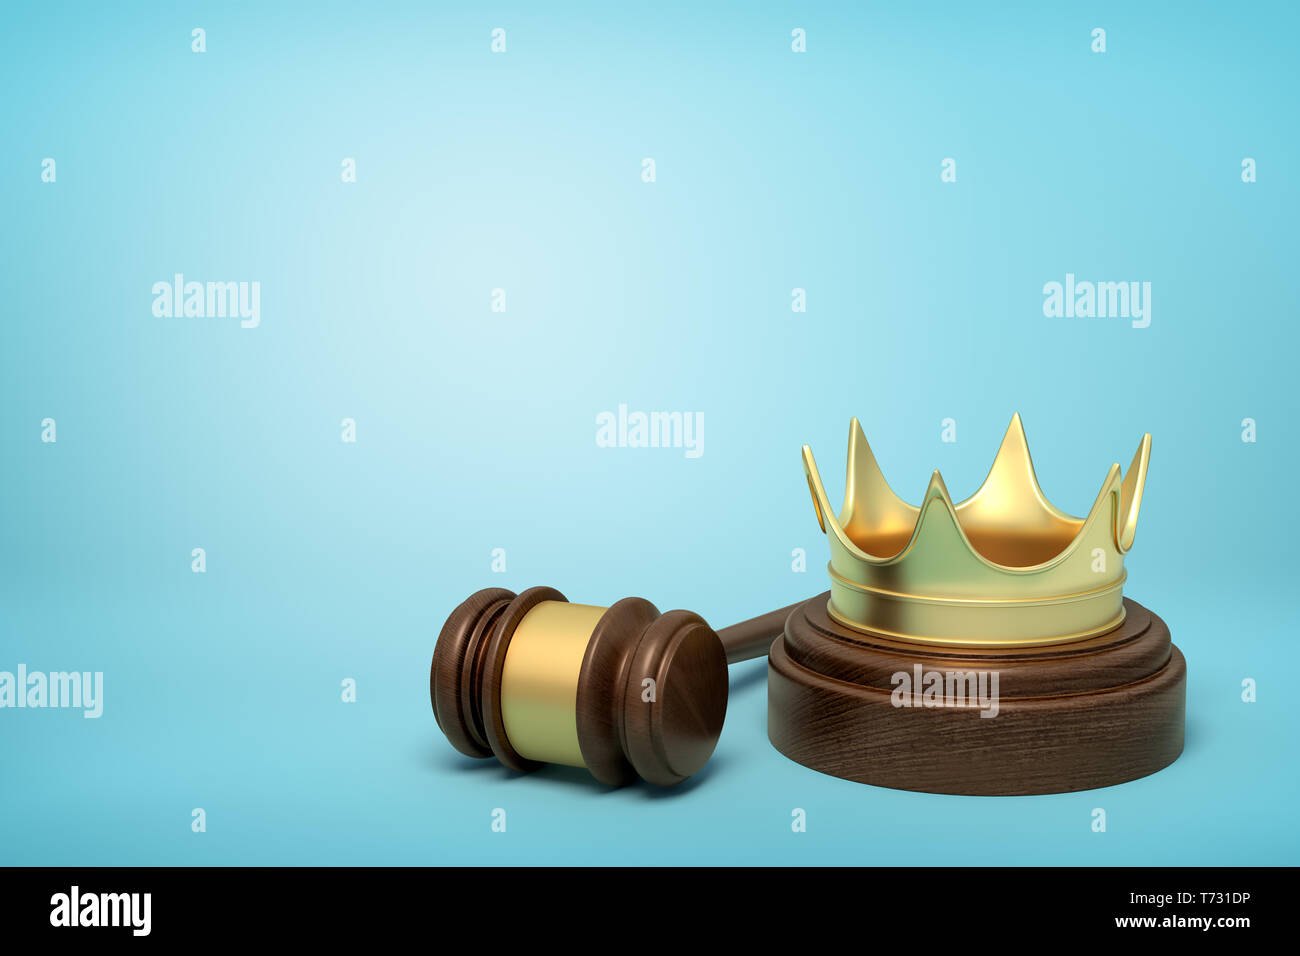 3d rendering of golden crown on round wooden block and brown wooden gavel on blue background Stock Photo